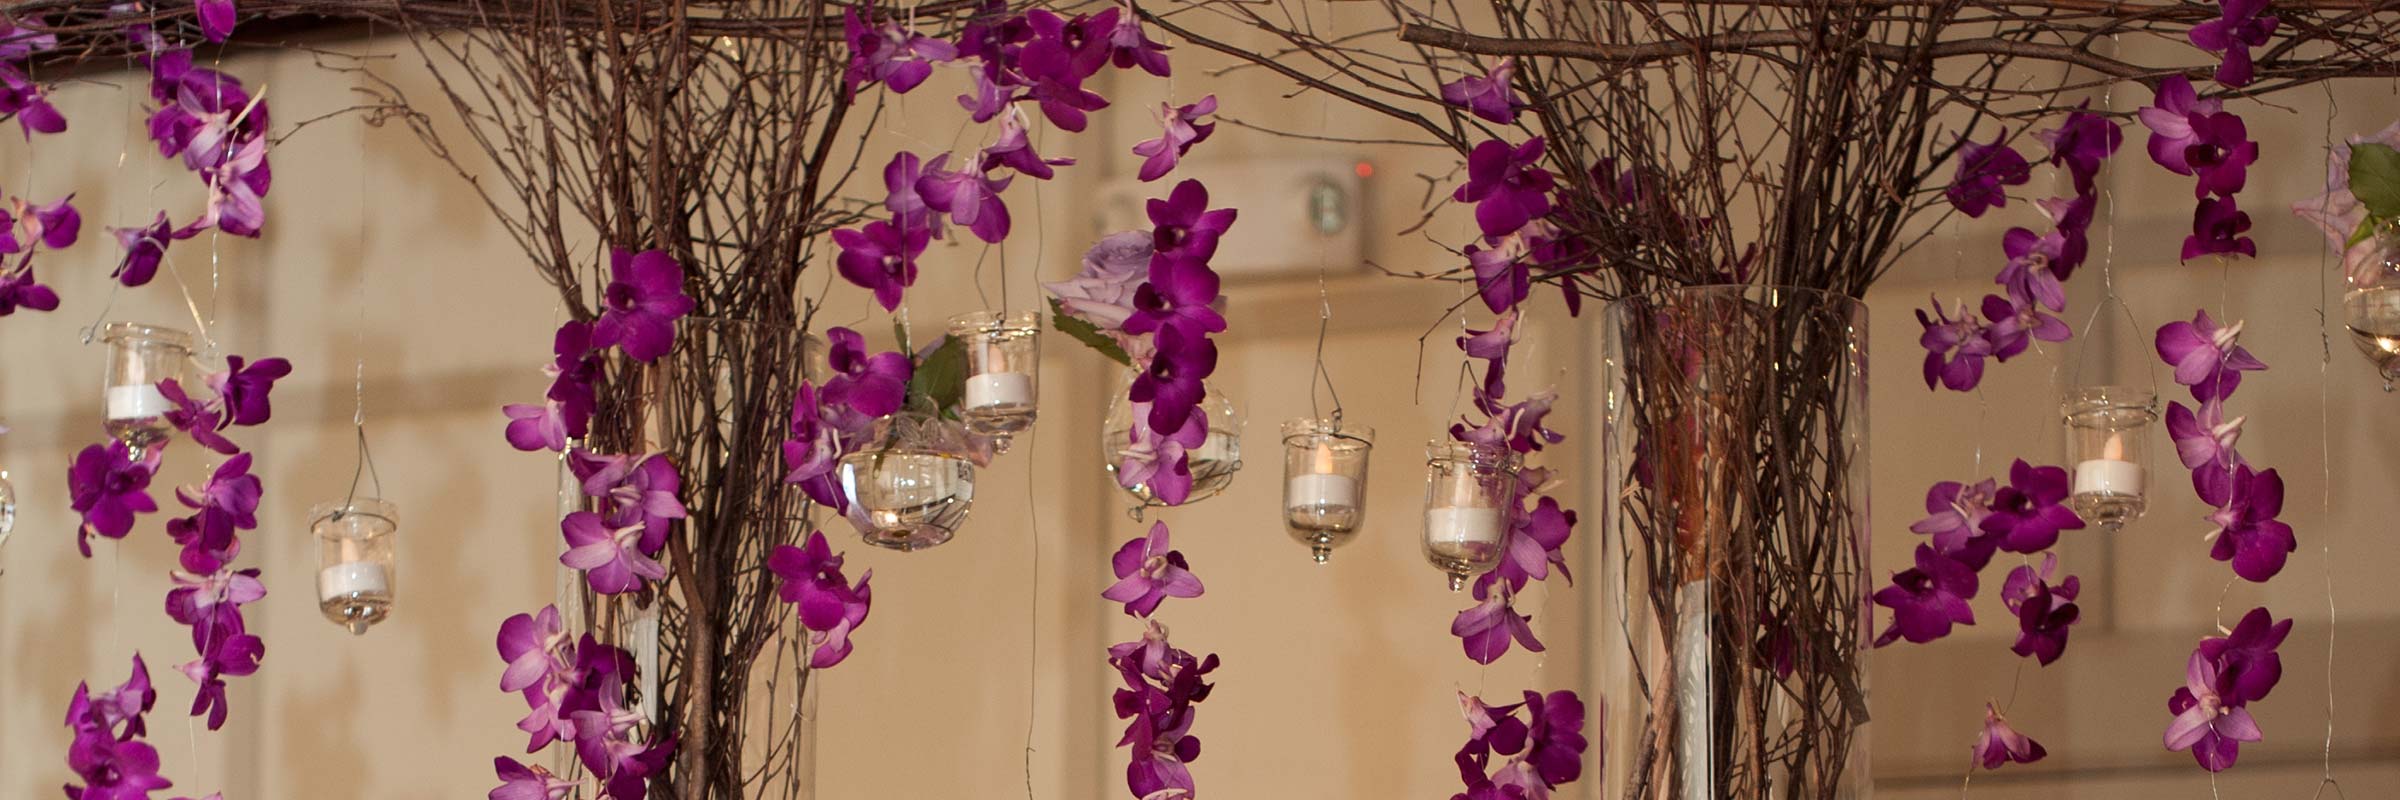 Candles Fresh Purple Hanging Flowers Branches